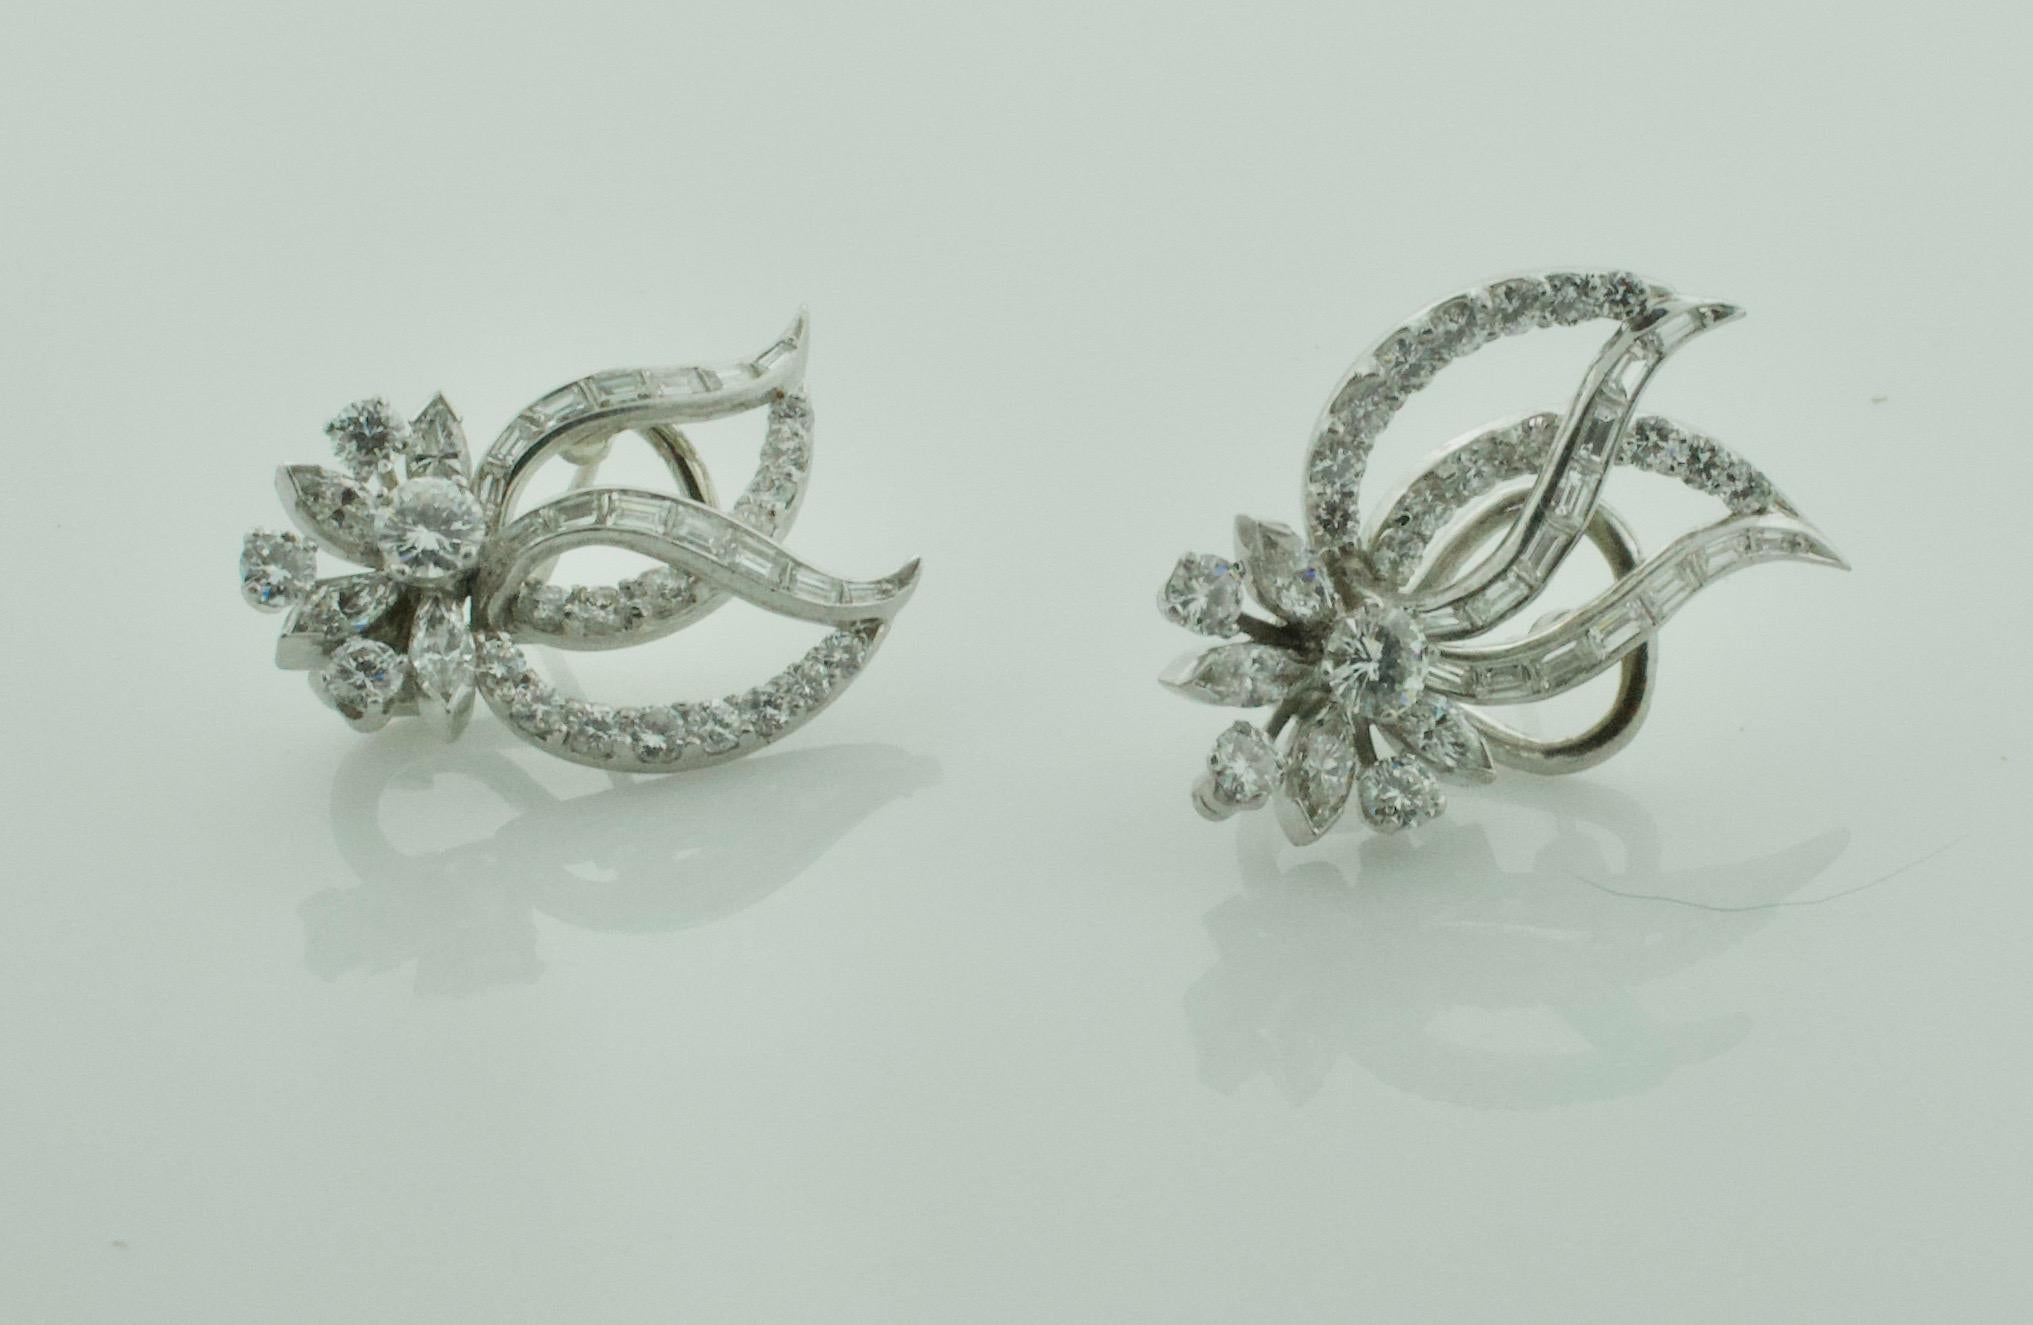 Platinum and Diamond Handmade Earrings Circa 1940's 4.35 carats
Left and Right 
Two Round Brilliant Cut Diamonds weighing .50 carats approximately [GH-VVS-SI1}
Thirty Two Round Brilliant Cut Diamonds weighing 1.15 carats approximately